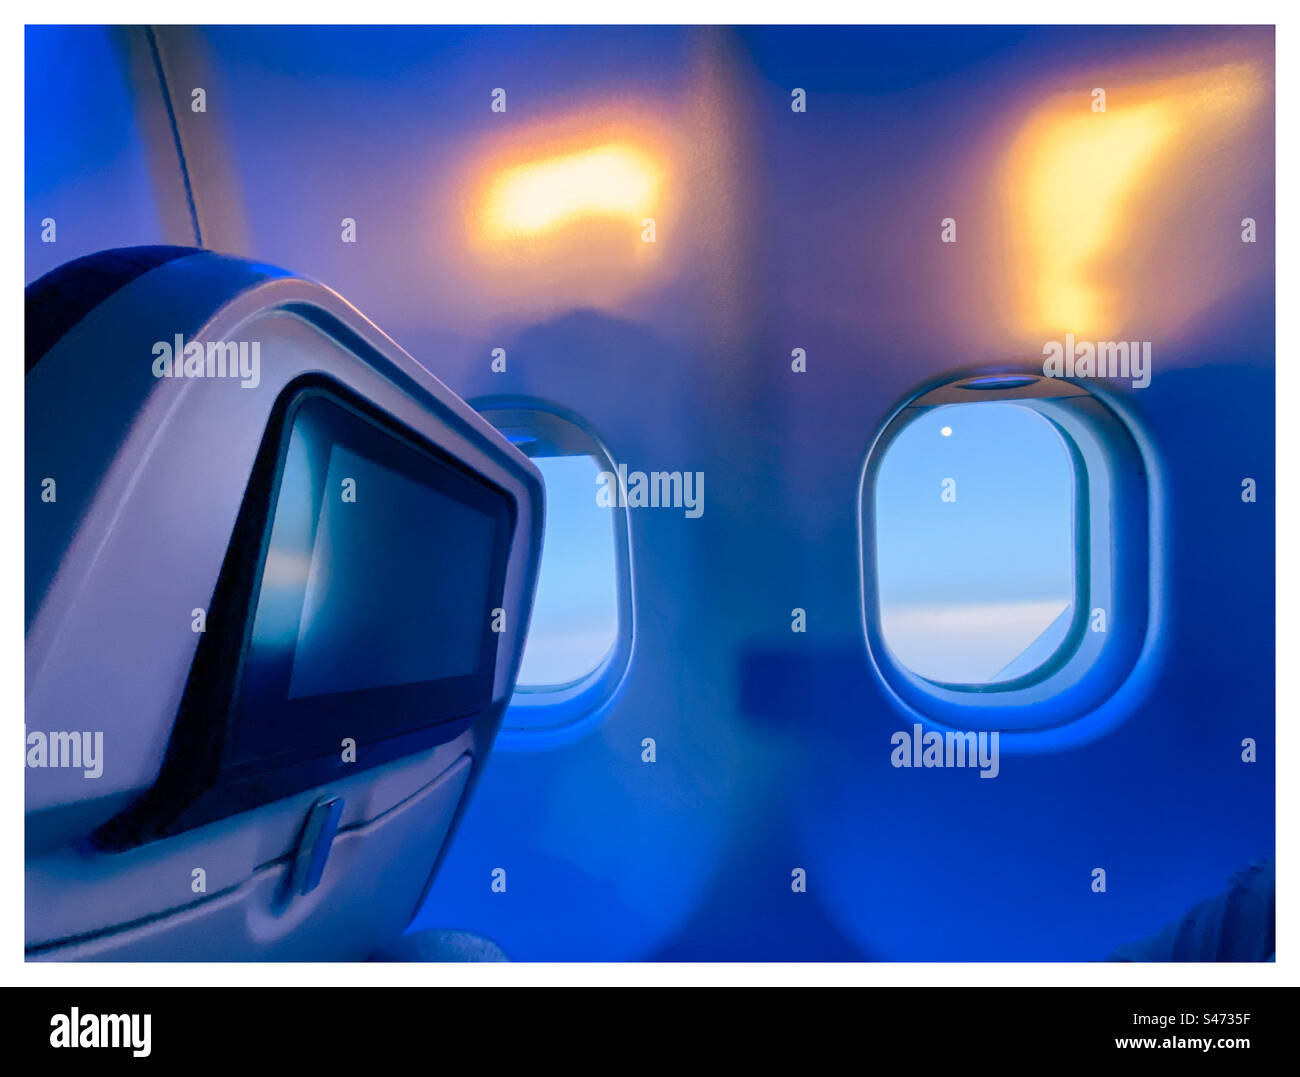 Blue lights wake people up on a long haul flight to Windhoek Stock Photo